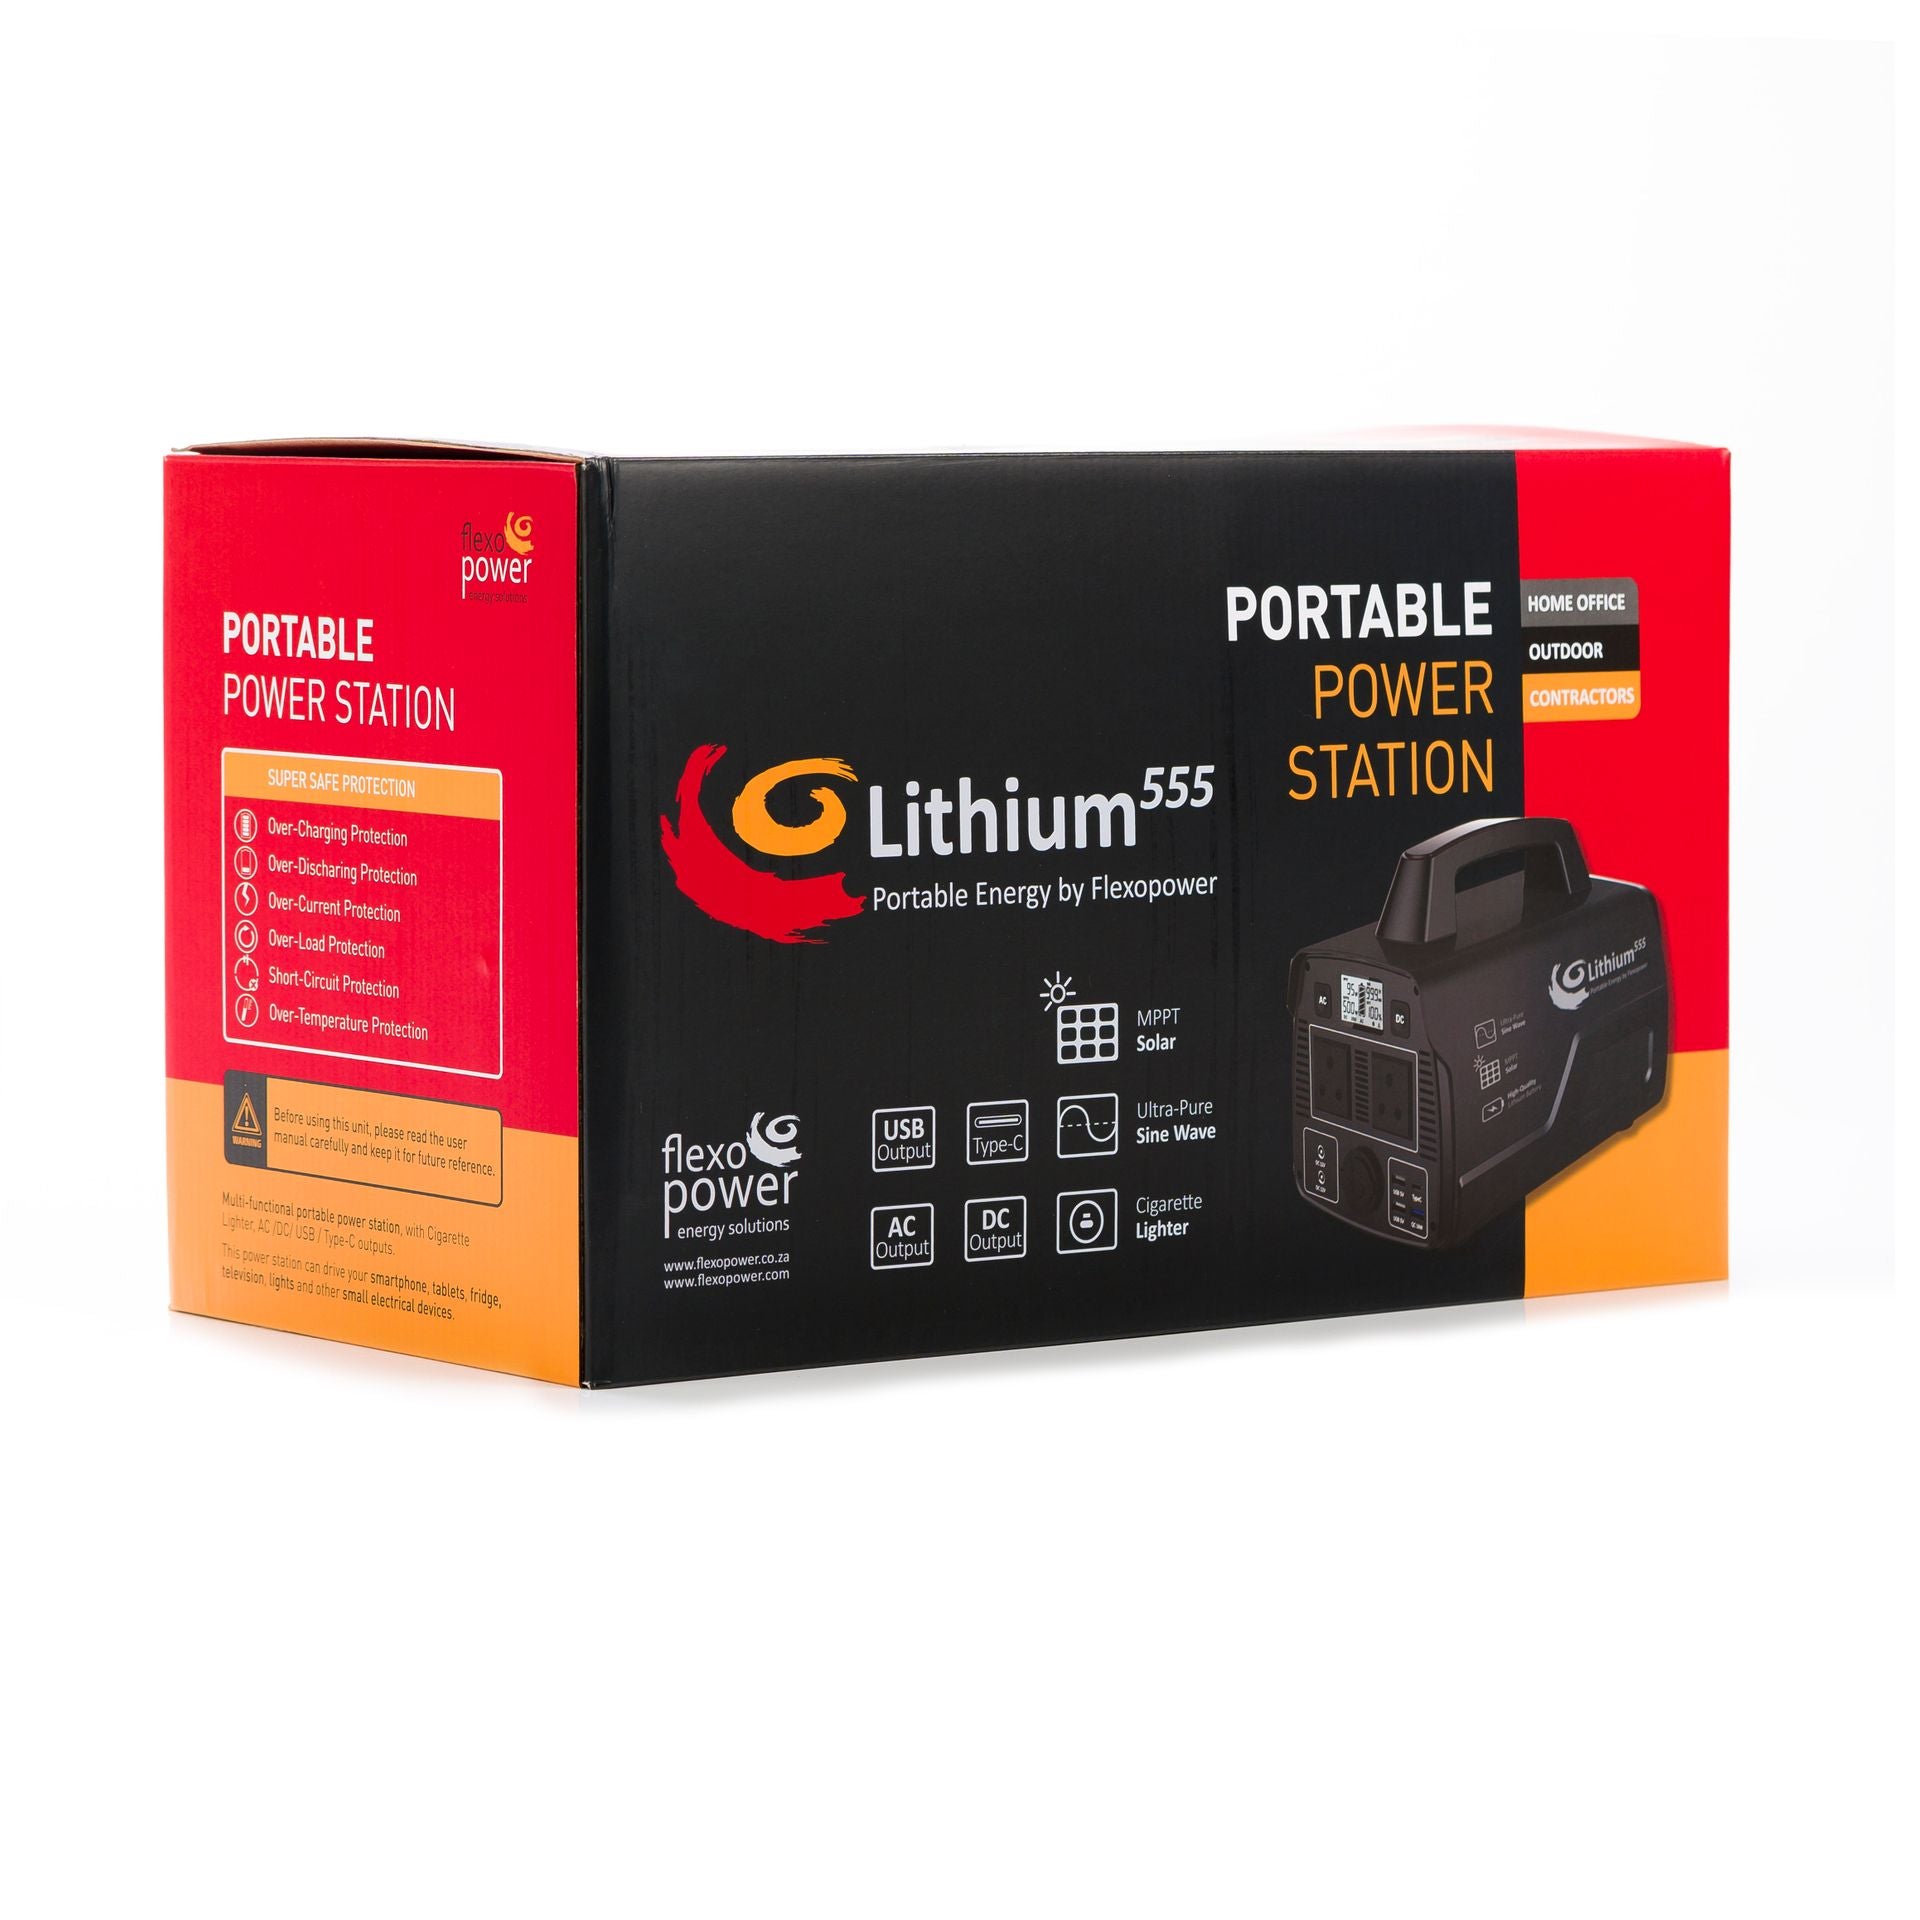 LITHIUM555 PORTABLE POWER STATION BY FLEXOPOWER